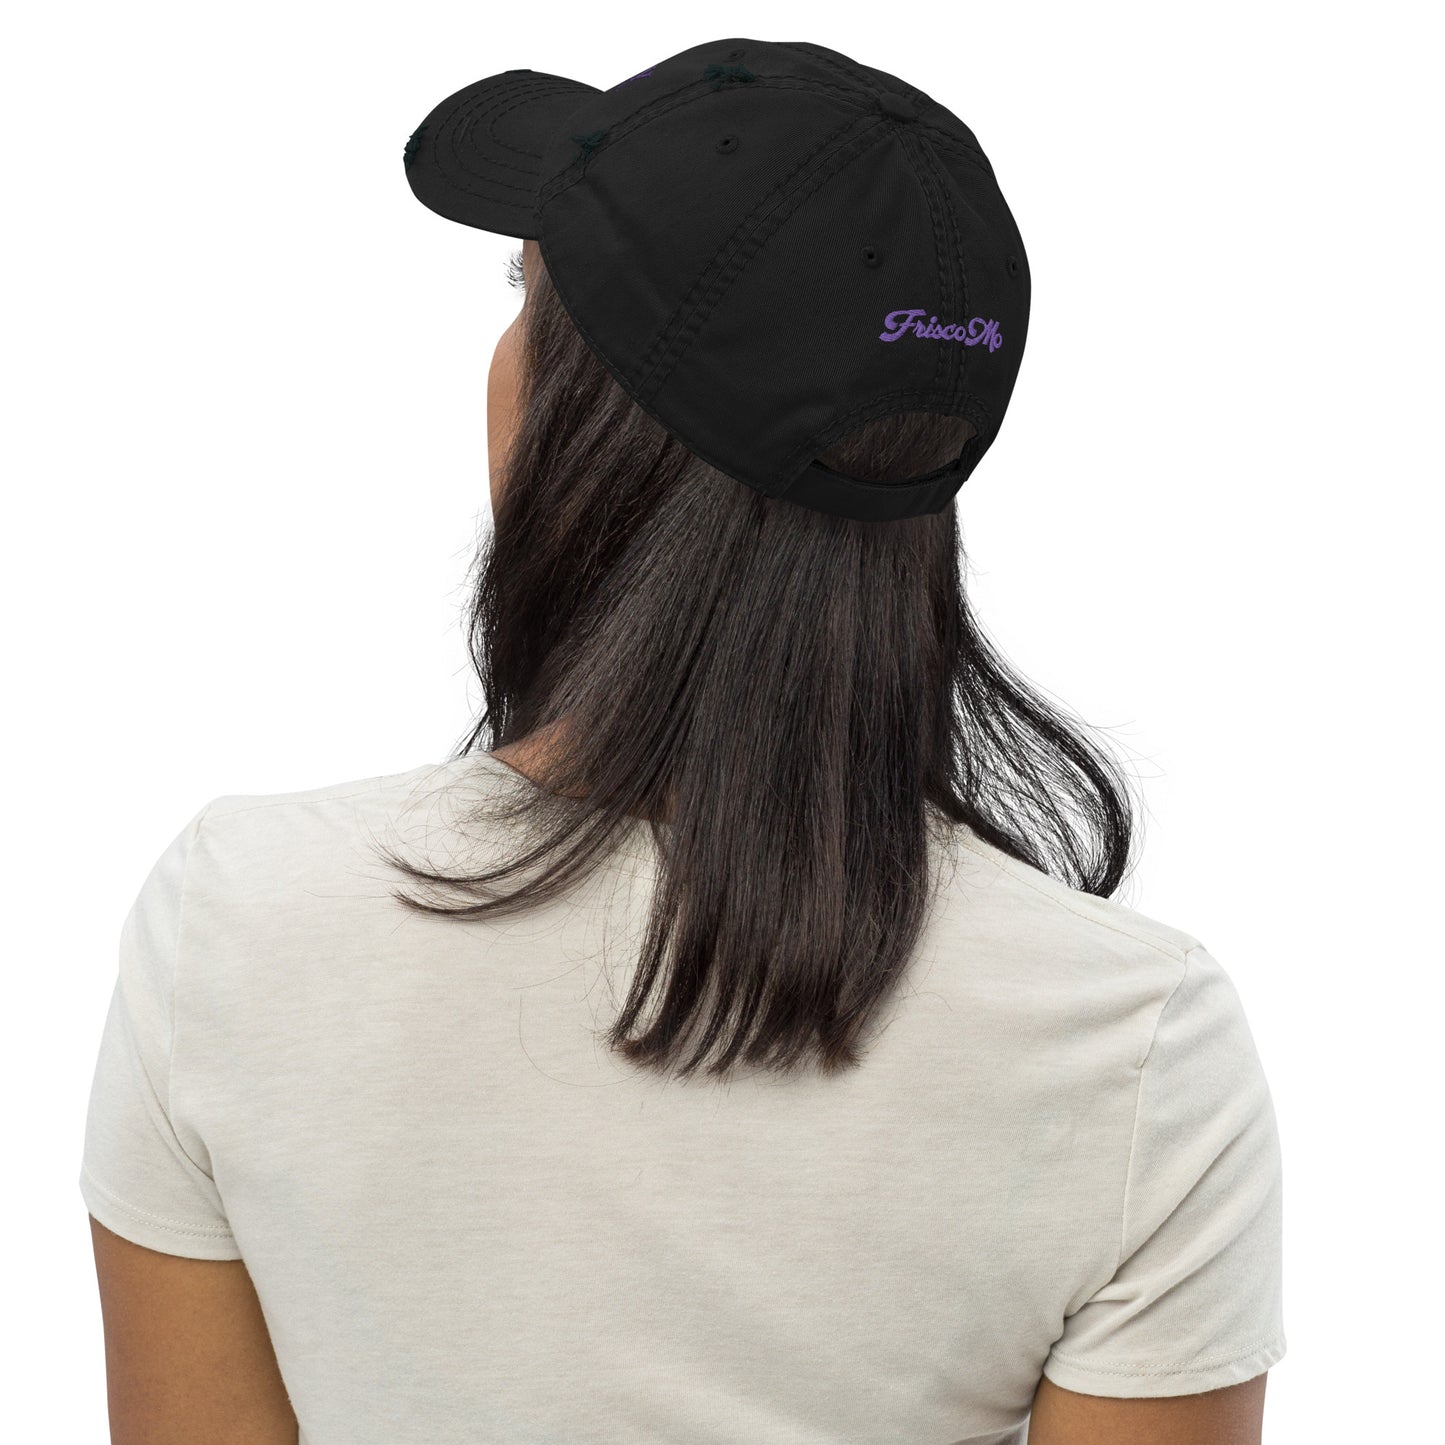 Trinity VB Embroidered Distressed Cap